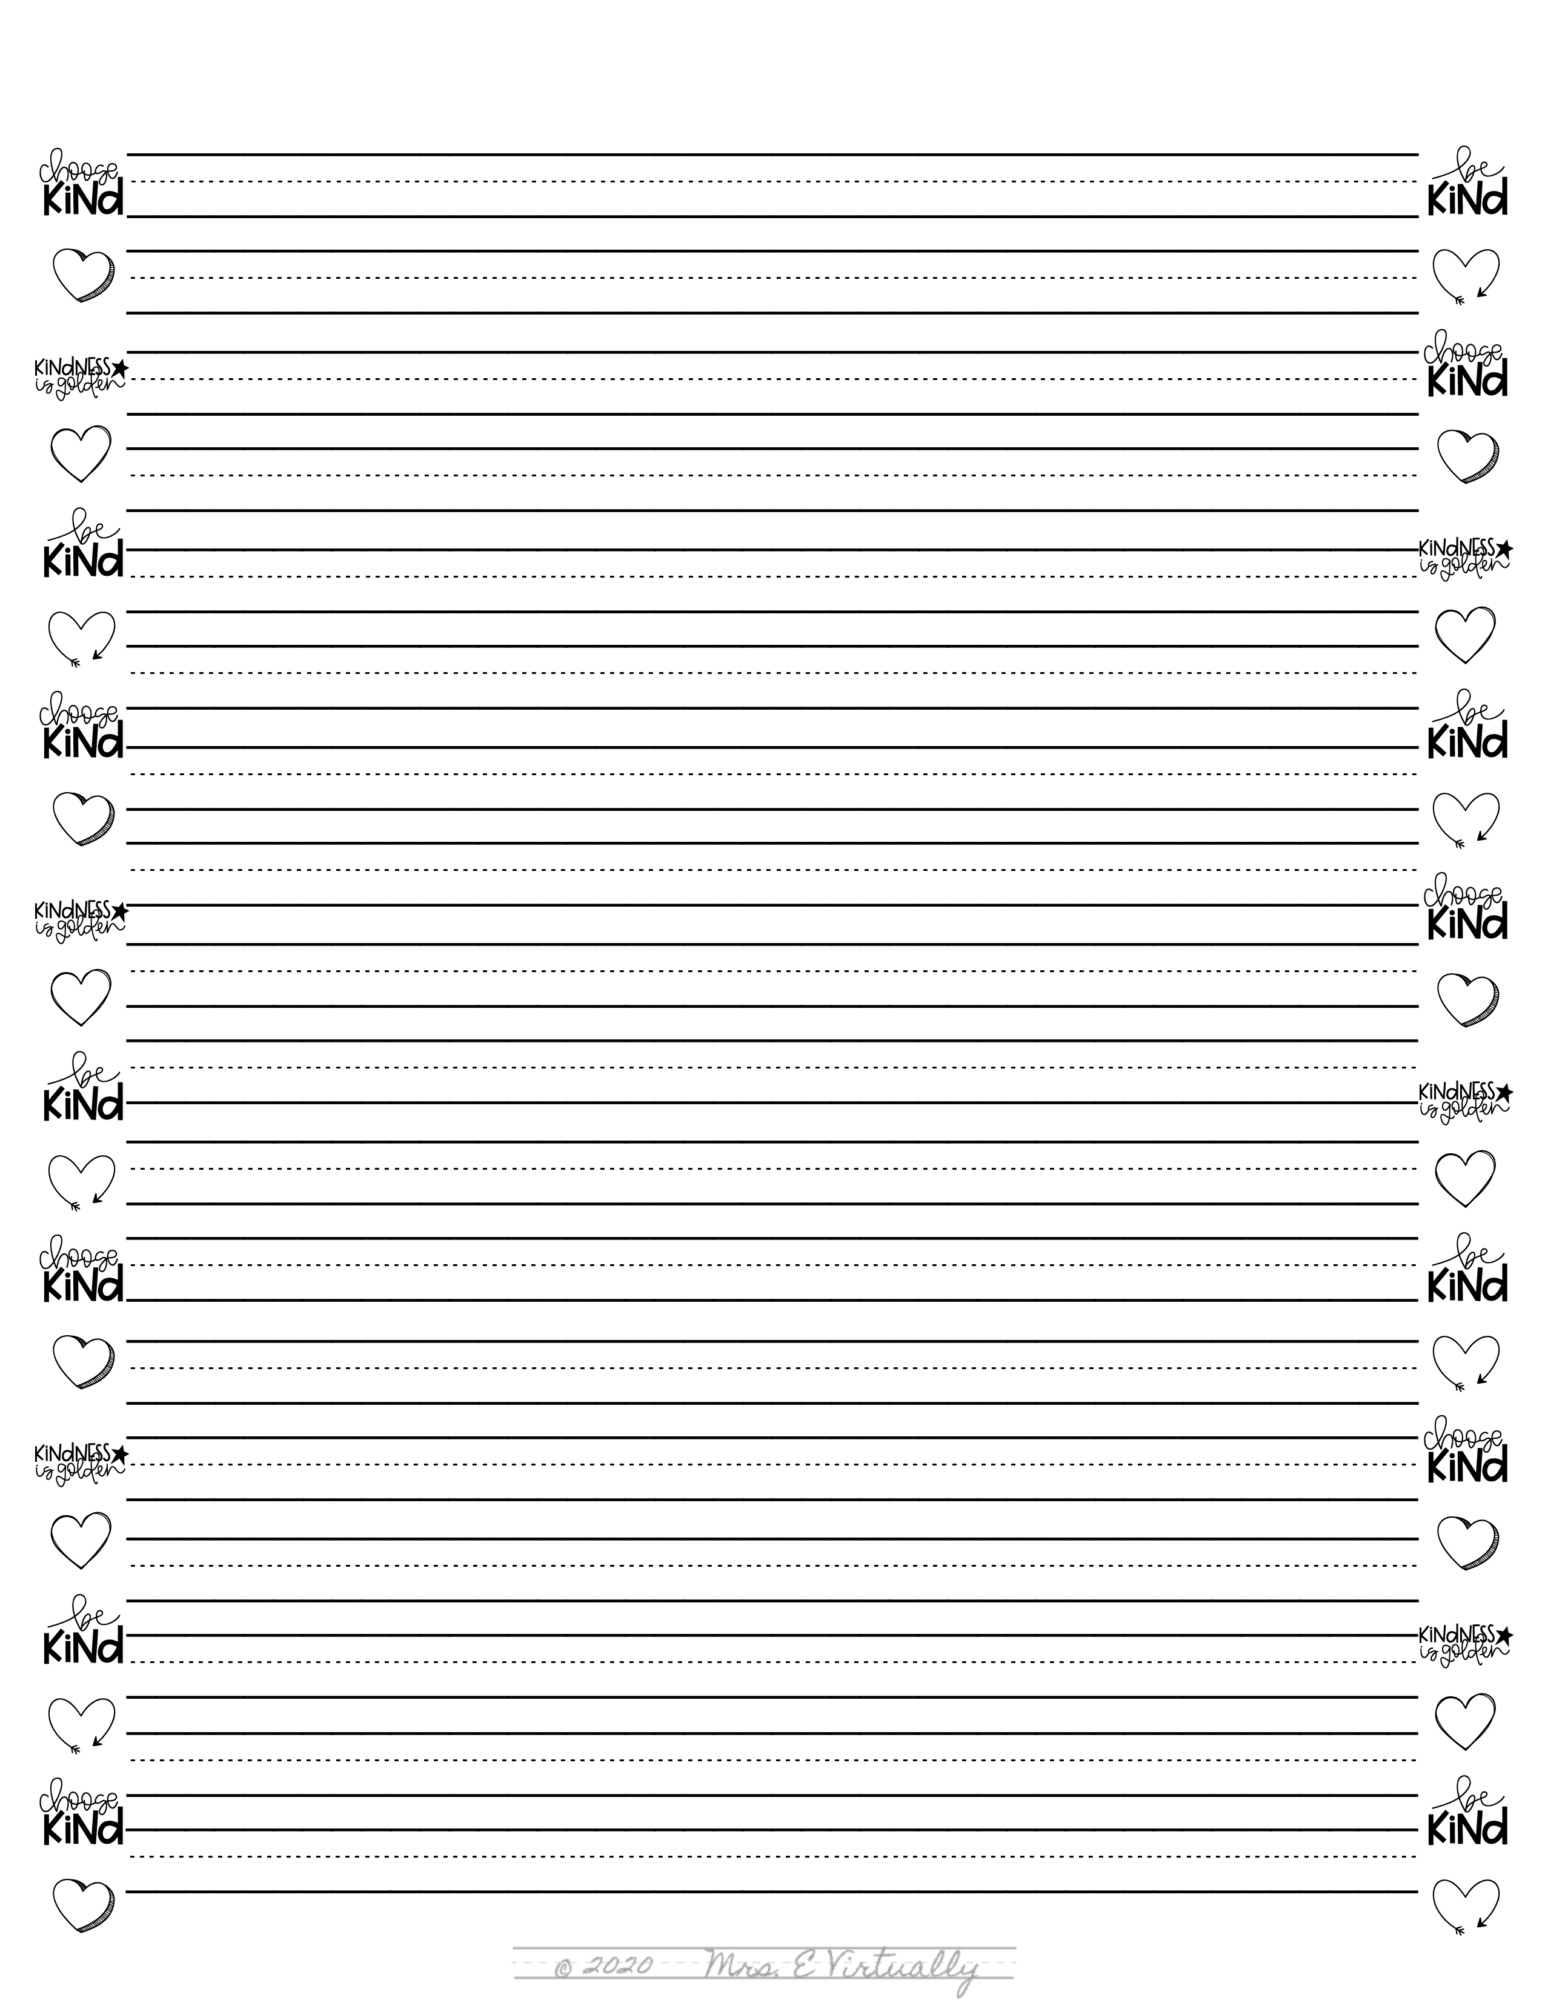 Primary Lined Writing Paper Printable-Winter Themed • Mrs E Virtually